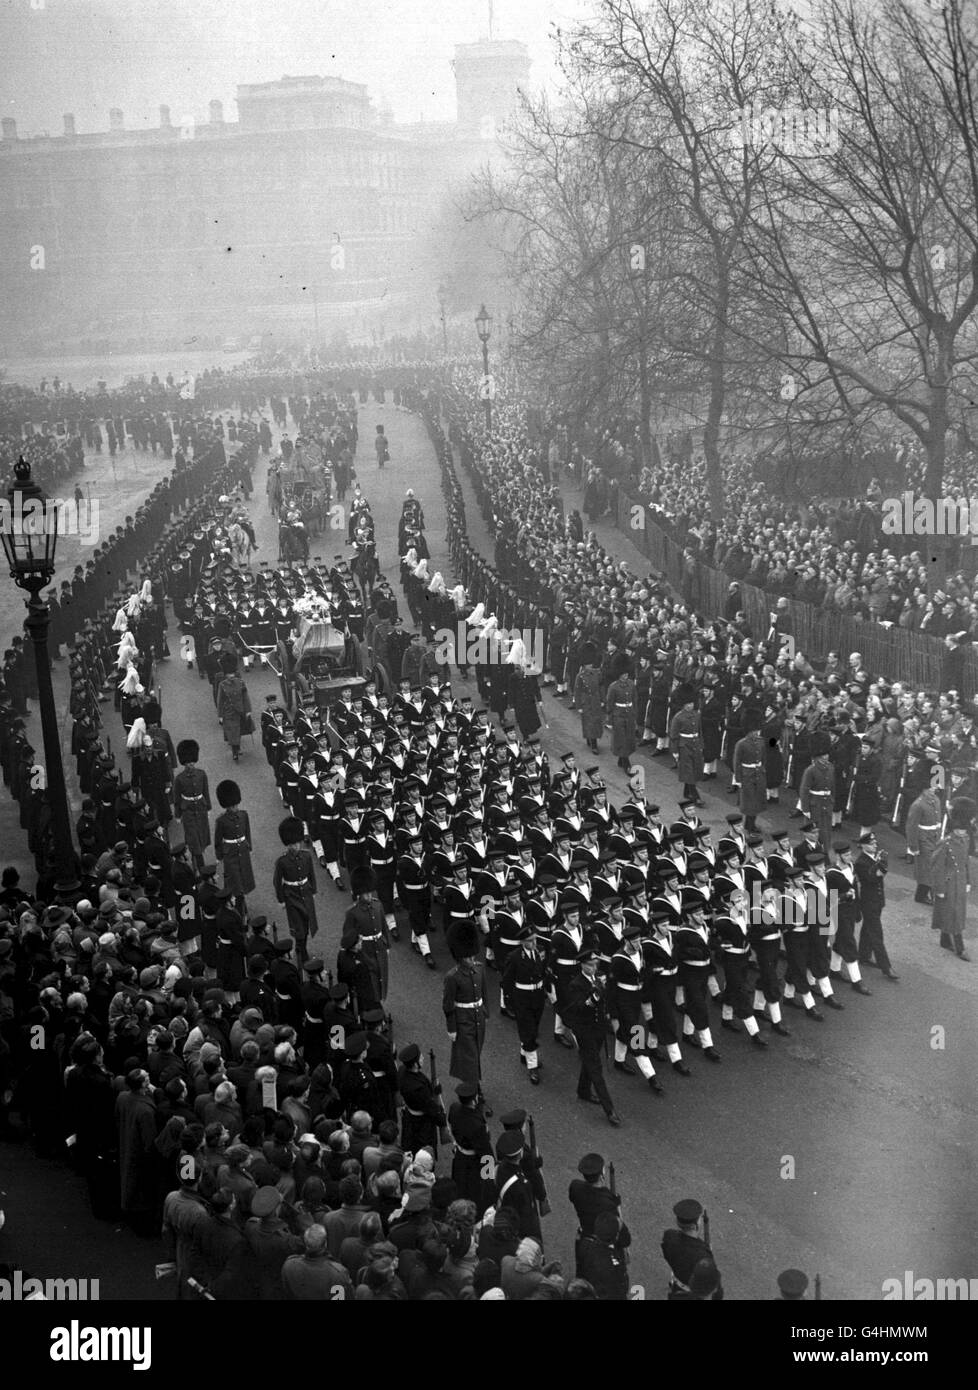 The funeral cortege of King George VI moves from Horse Guards Parade into the Mall on the way to Paddington Station borne on a gun carriage. Stock Photo